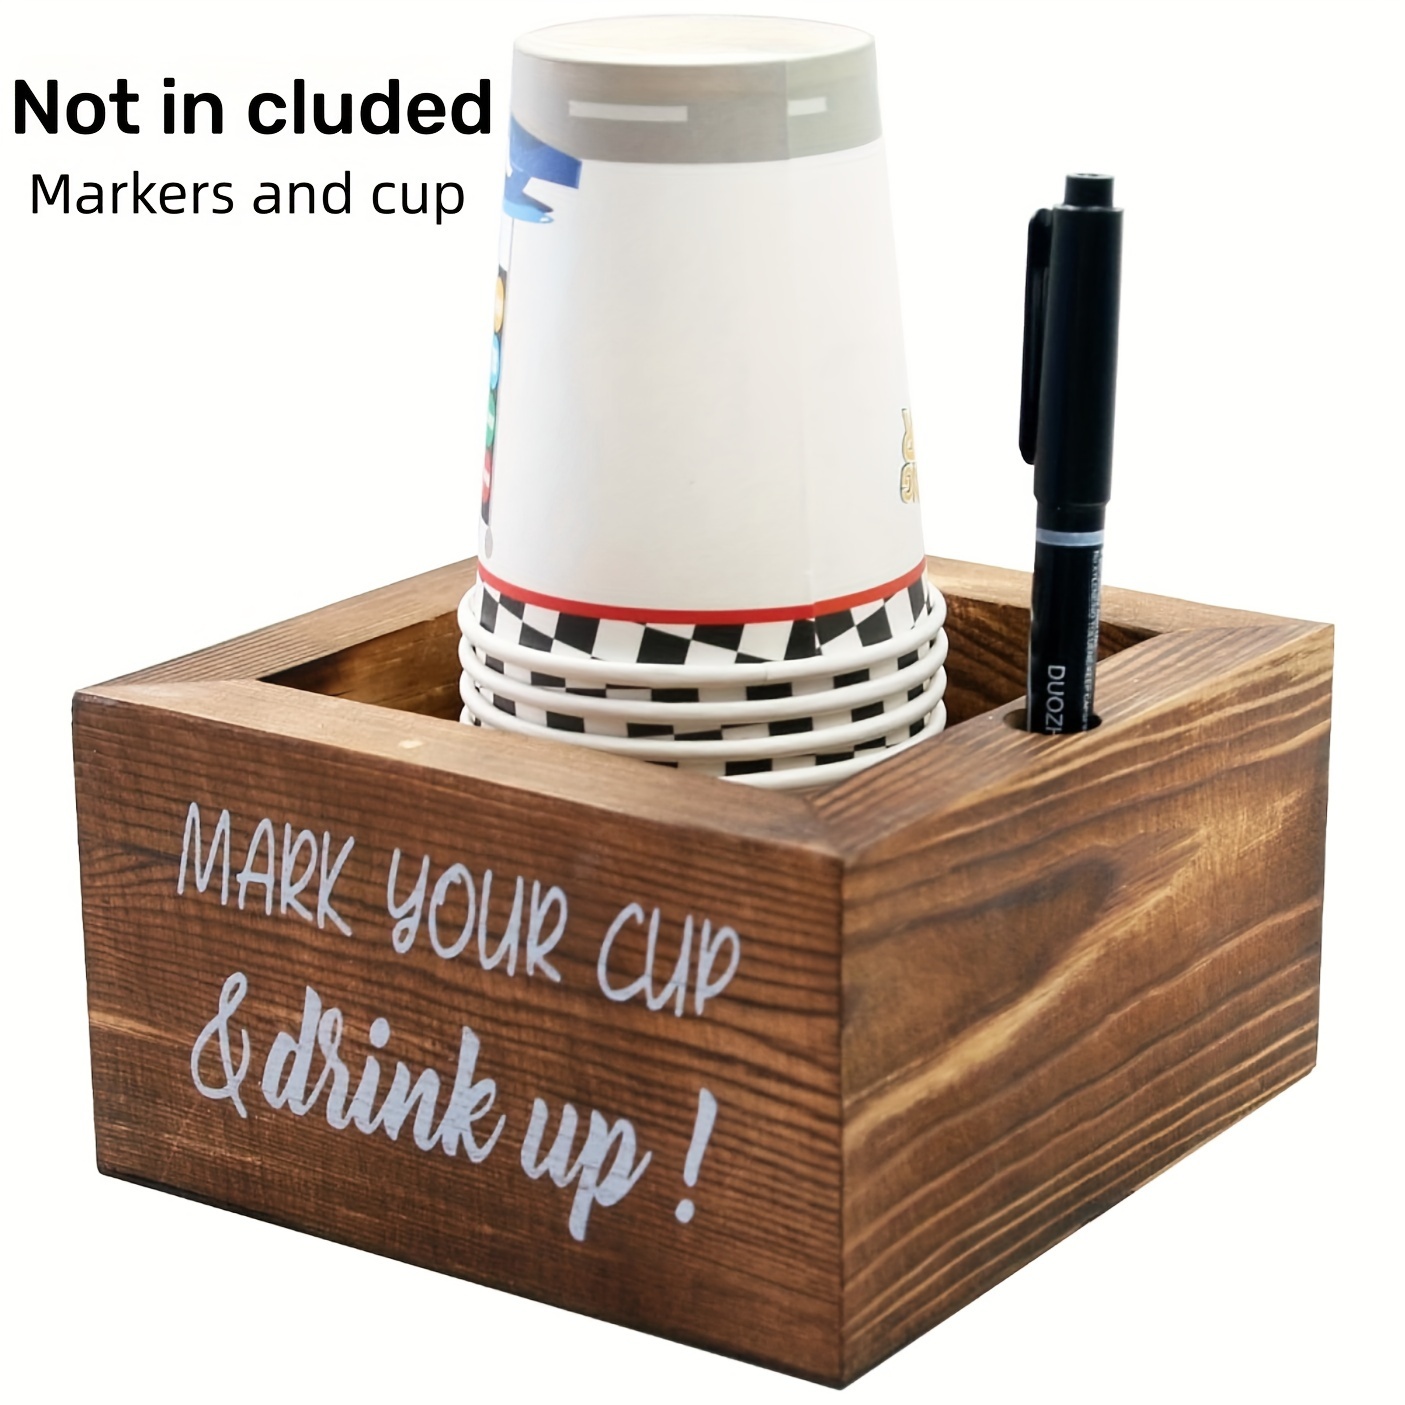 1pc Wooden Solo Cup Holder - Party Cup Holder With Marker Slot, Solo Cup  Holder For Party And Wedding, Rustic Disposable Cup Holder For Bar, Kitchen